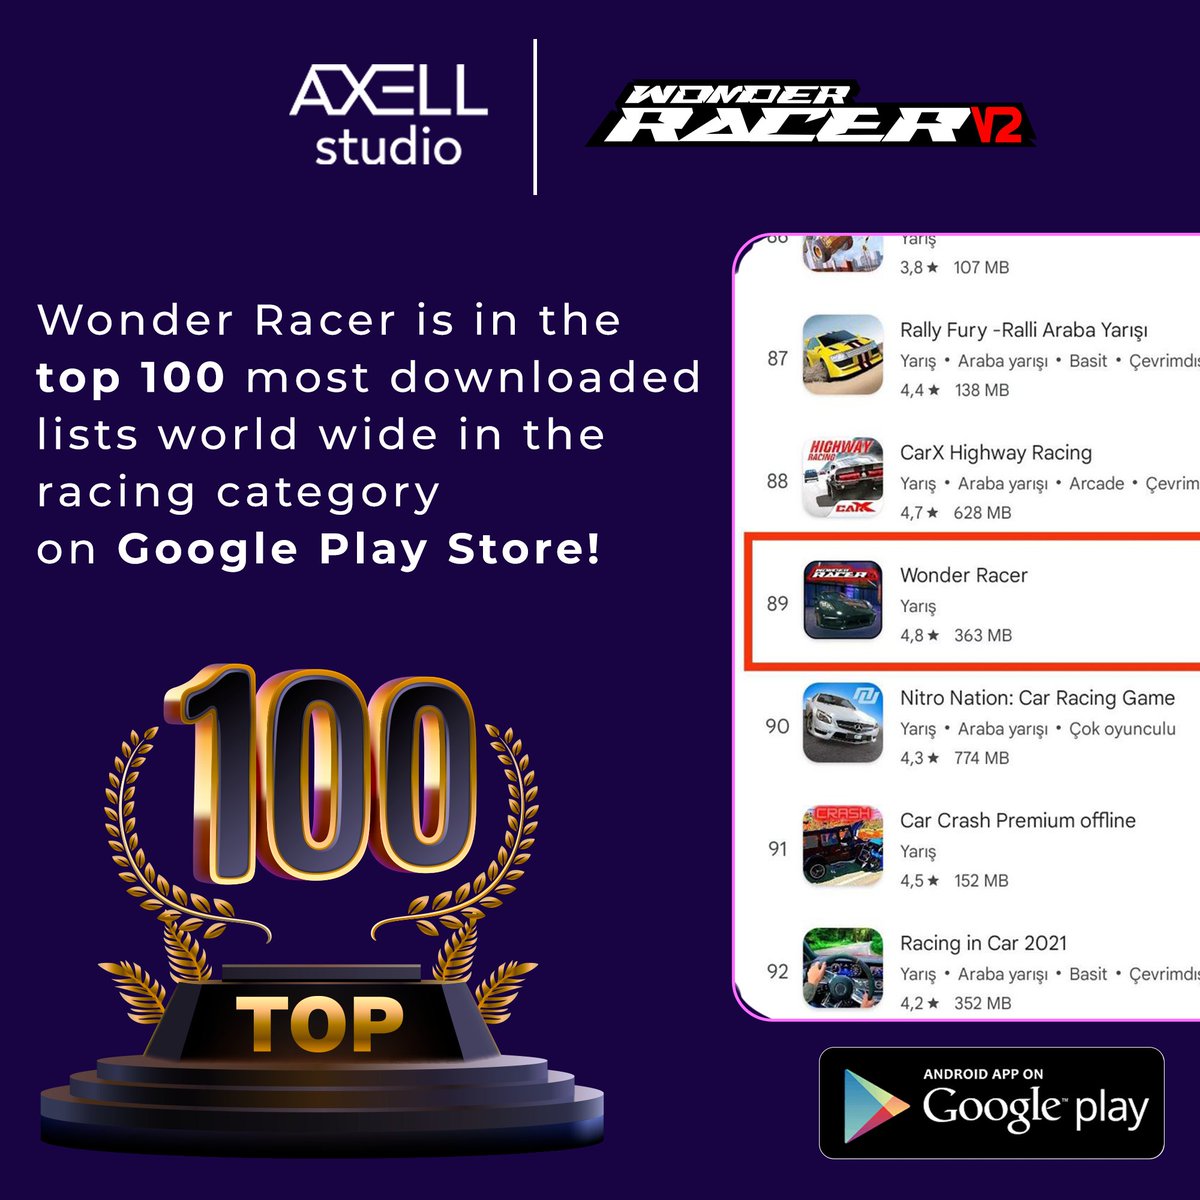 Wonder Racer, Axell Studio's game, is among the top 100 most downloaded games in the racing category on the Google Play Store! No one can stop our speed🤩 Download now and start playing 🔥 play.google.com/store/apps/det…